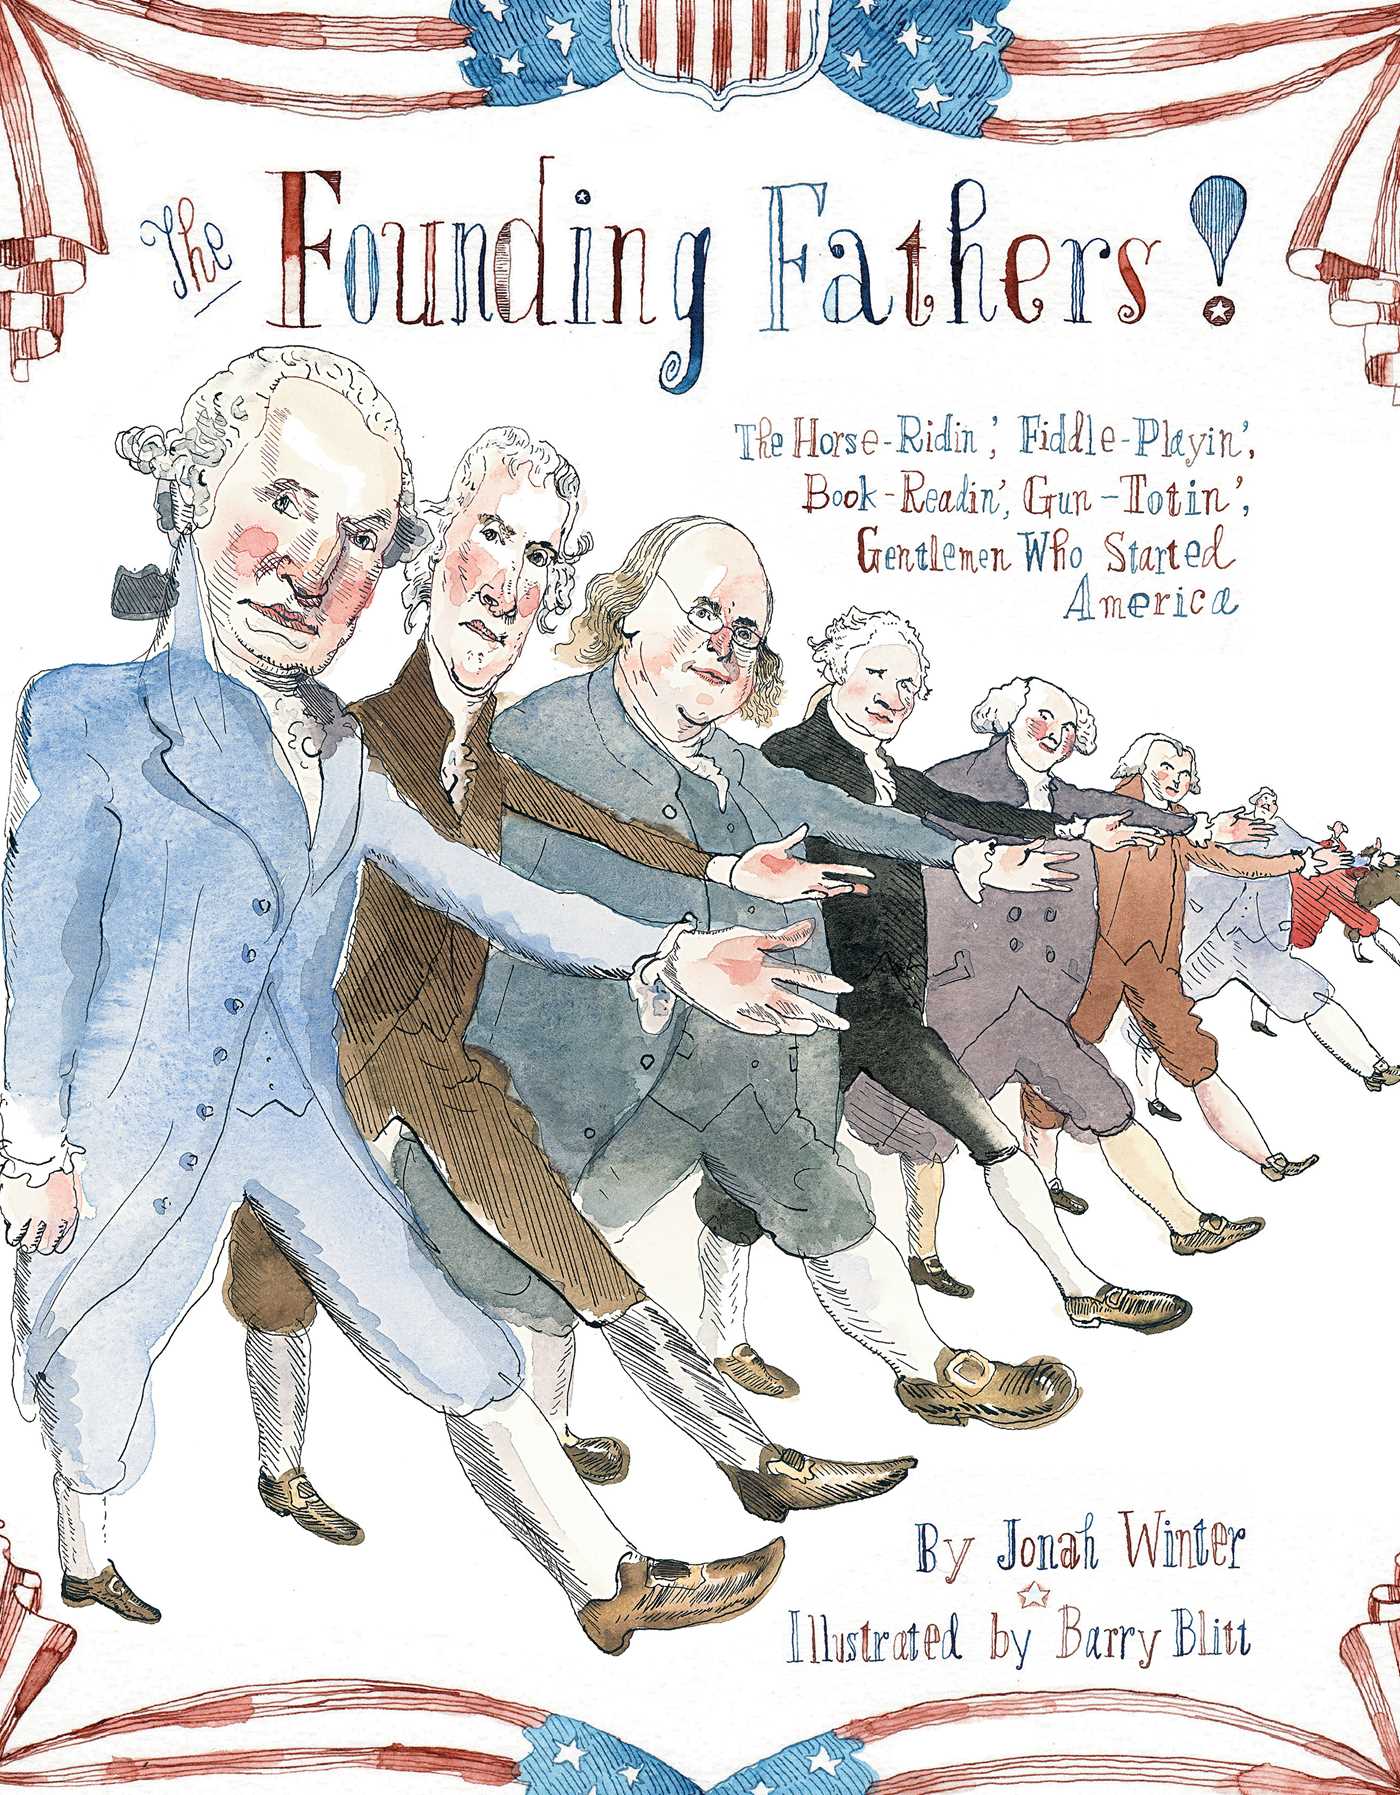 The Founding Fathers! : Those Horse-Ridin', Fiddle-Playin', Book-Readin', Gun-Totin' Gentlemen Who Started America